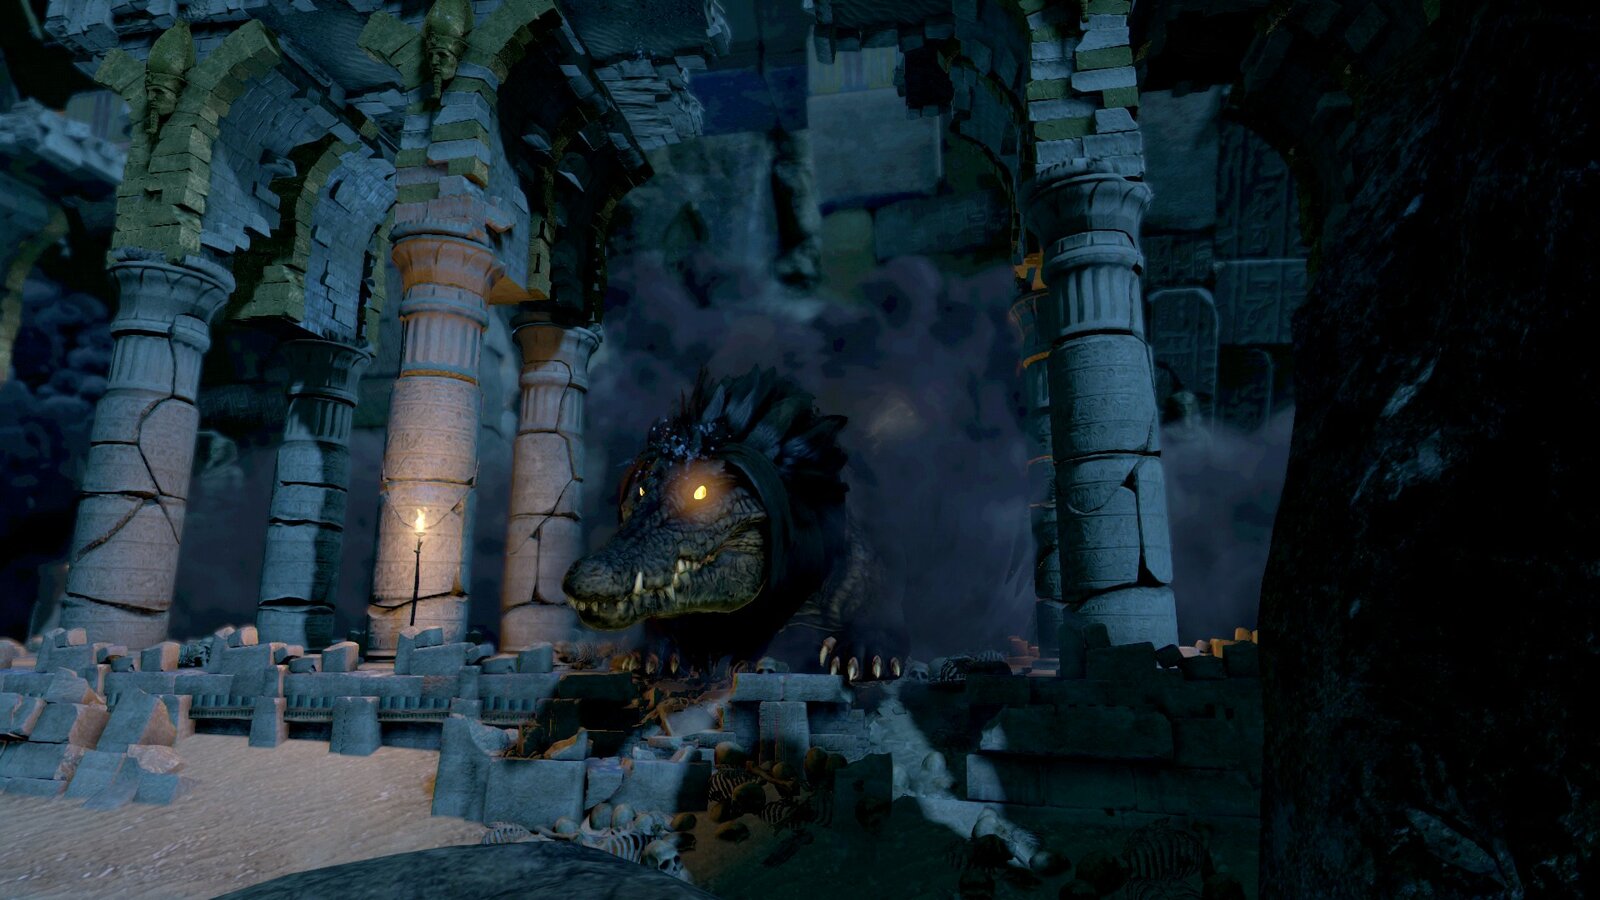 Lara Croft and the Temple of Osiris - Twisted Gears Pack